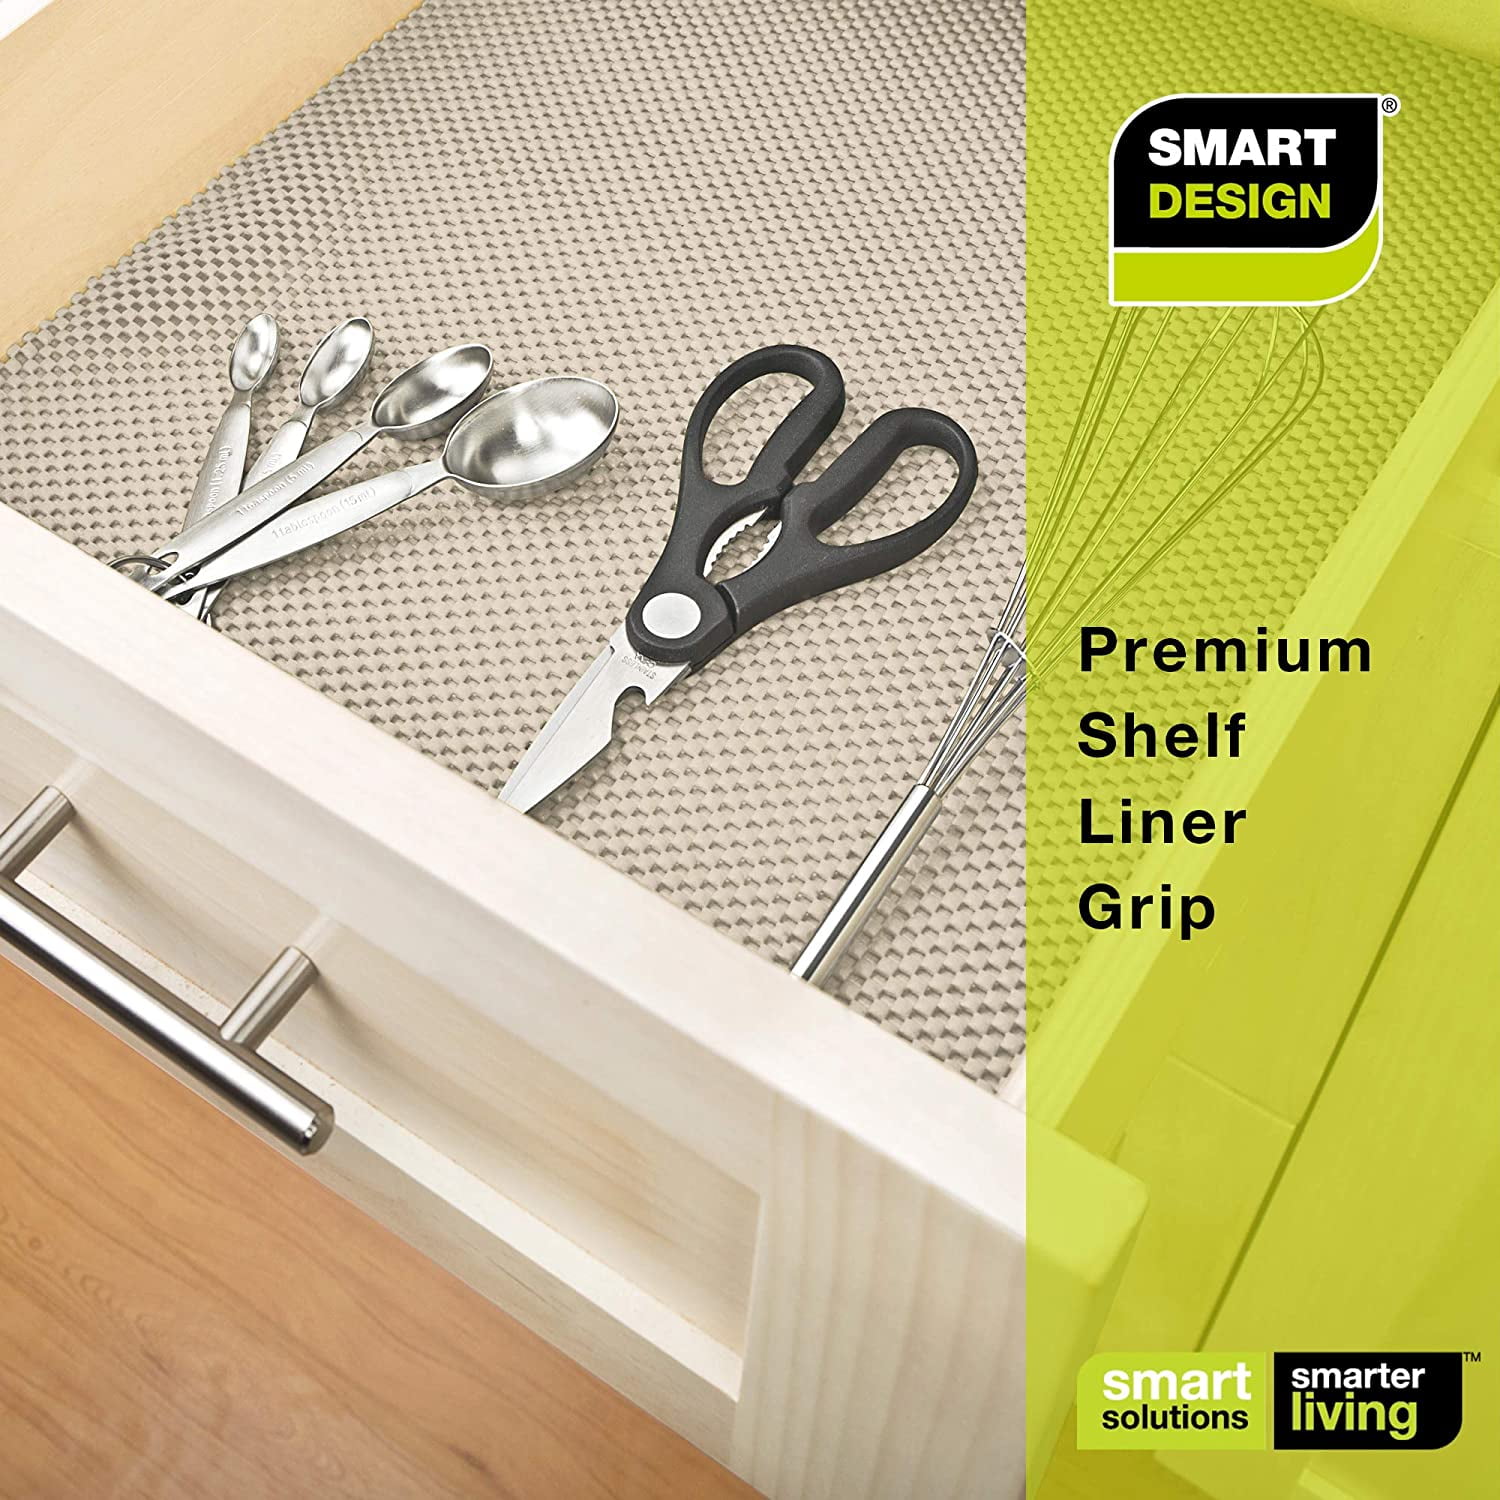 Smart Design Bonded Grip Shelf Liner – 18in x 5ft – Non-Adhesive Drawer  Liner with Strong Grip Helps Protect and Personalize Your Home Organization